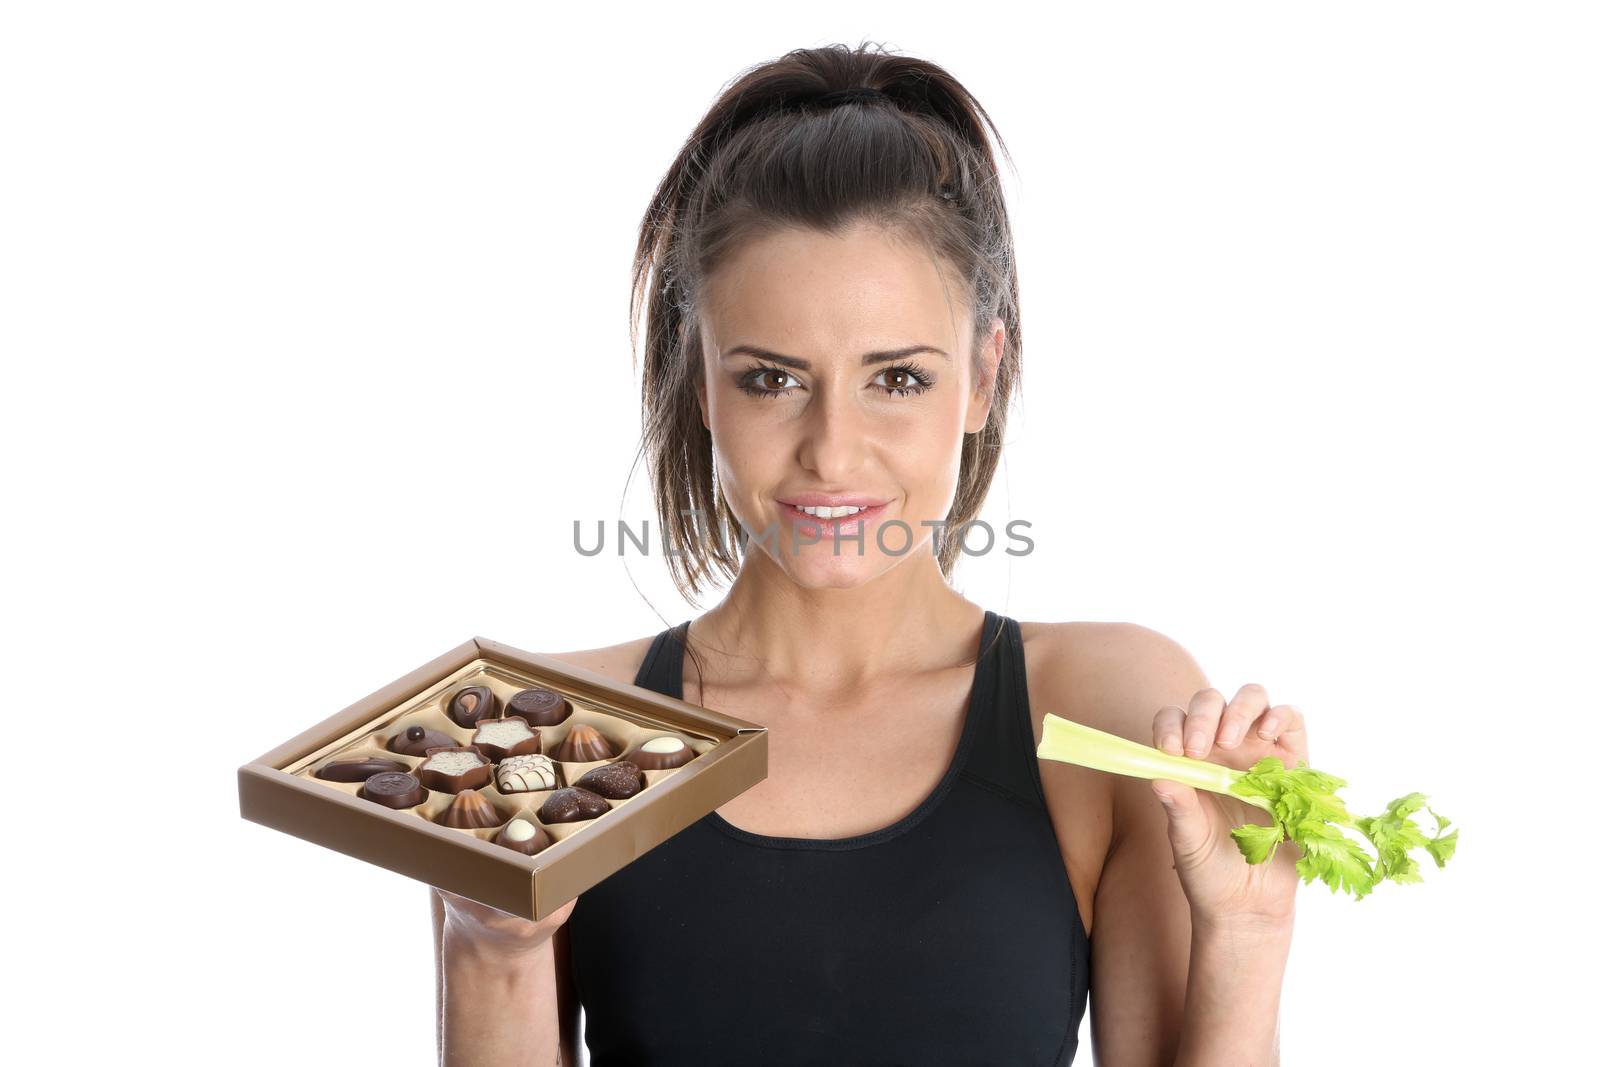 Model Released. Woman Holding Celery and Chocolates